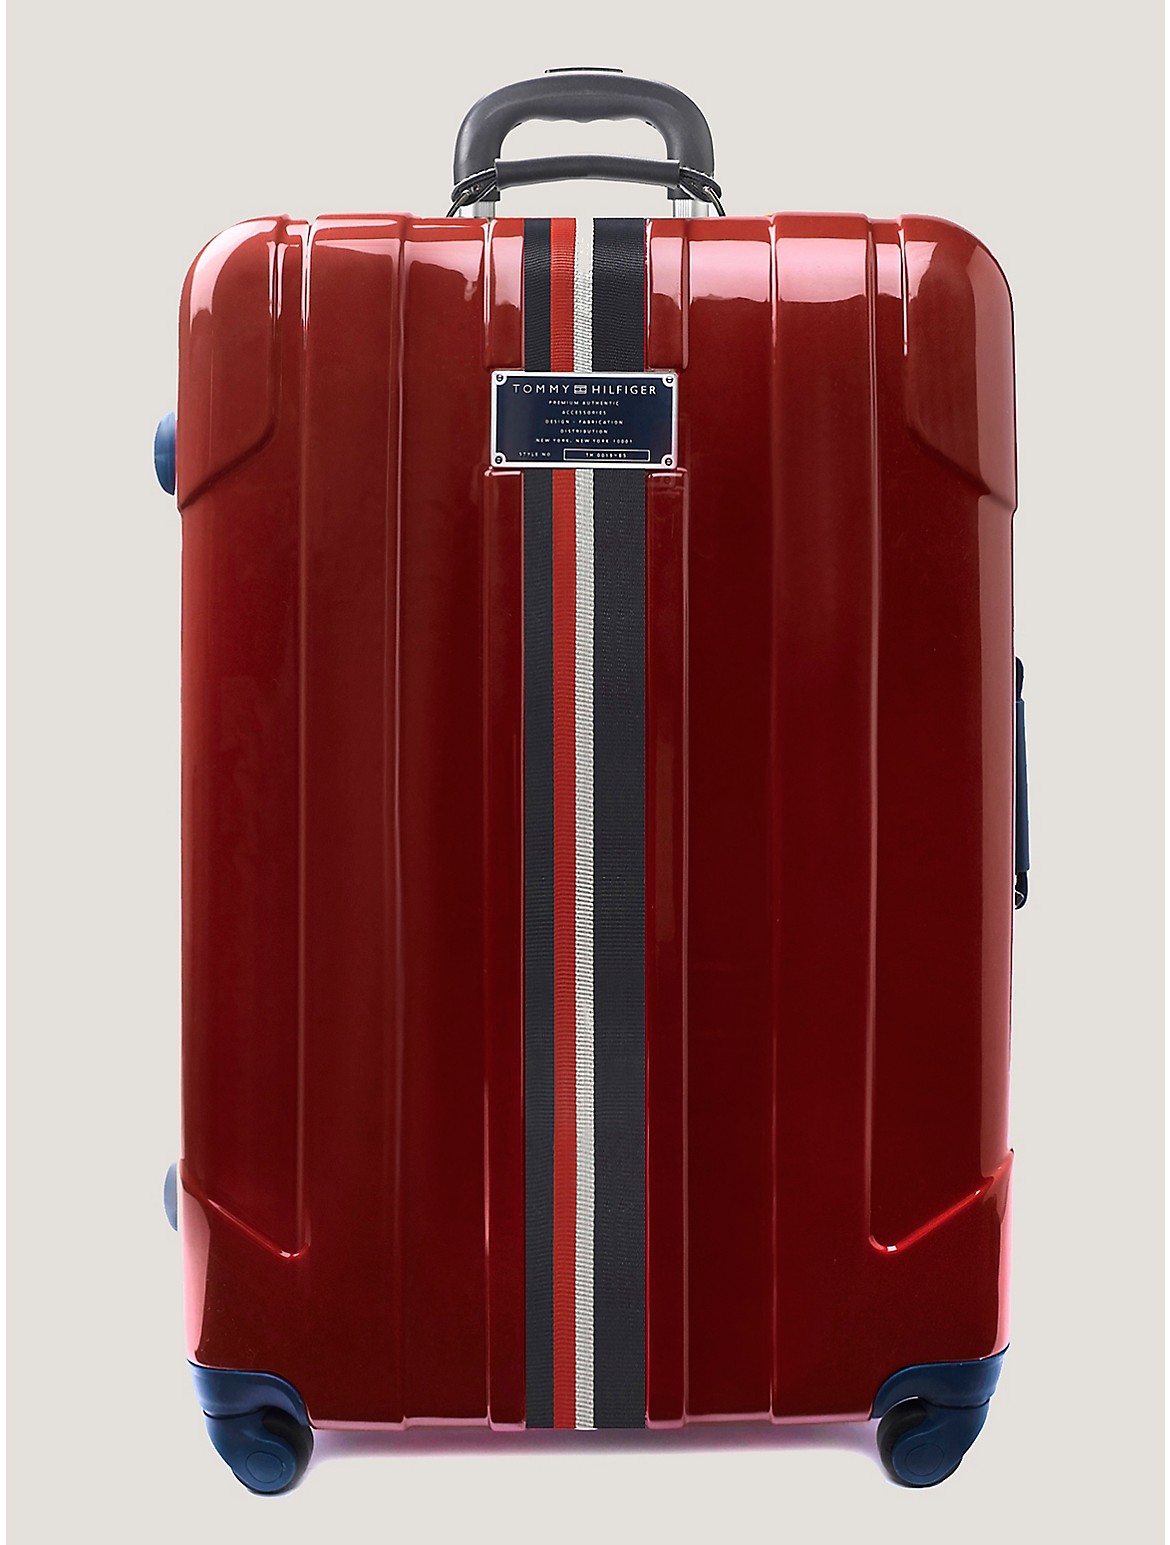 Tommy Hilfiger 28" Hardcase Spinner Luggage In Red